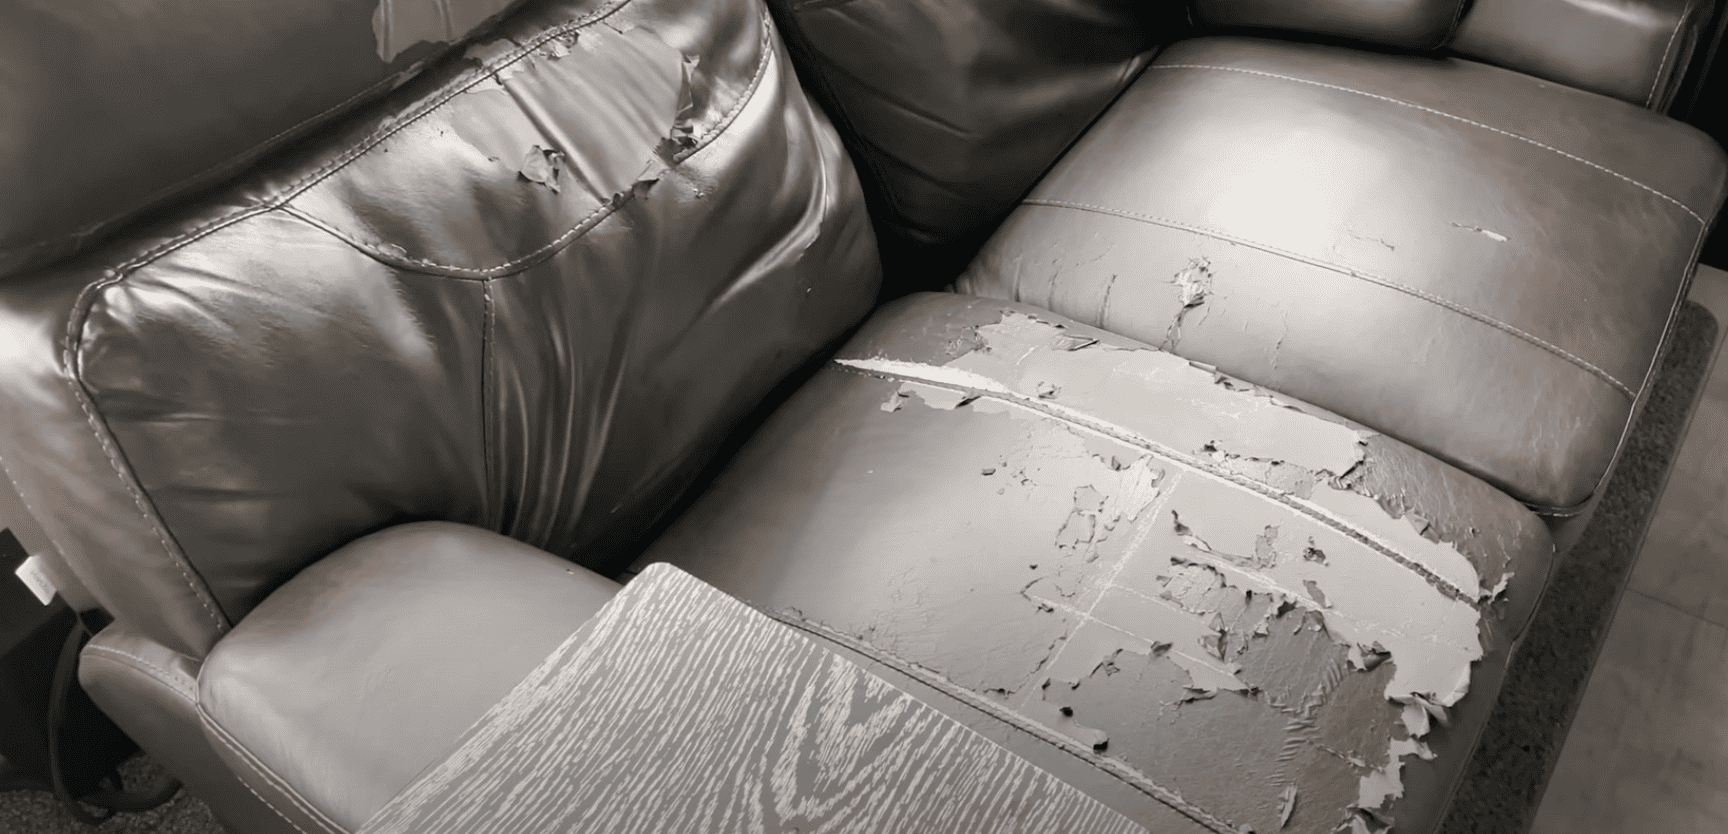 a peeling rv furniture couch with significant peeling damage.